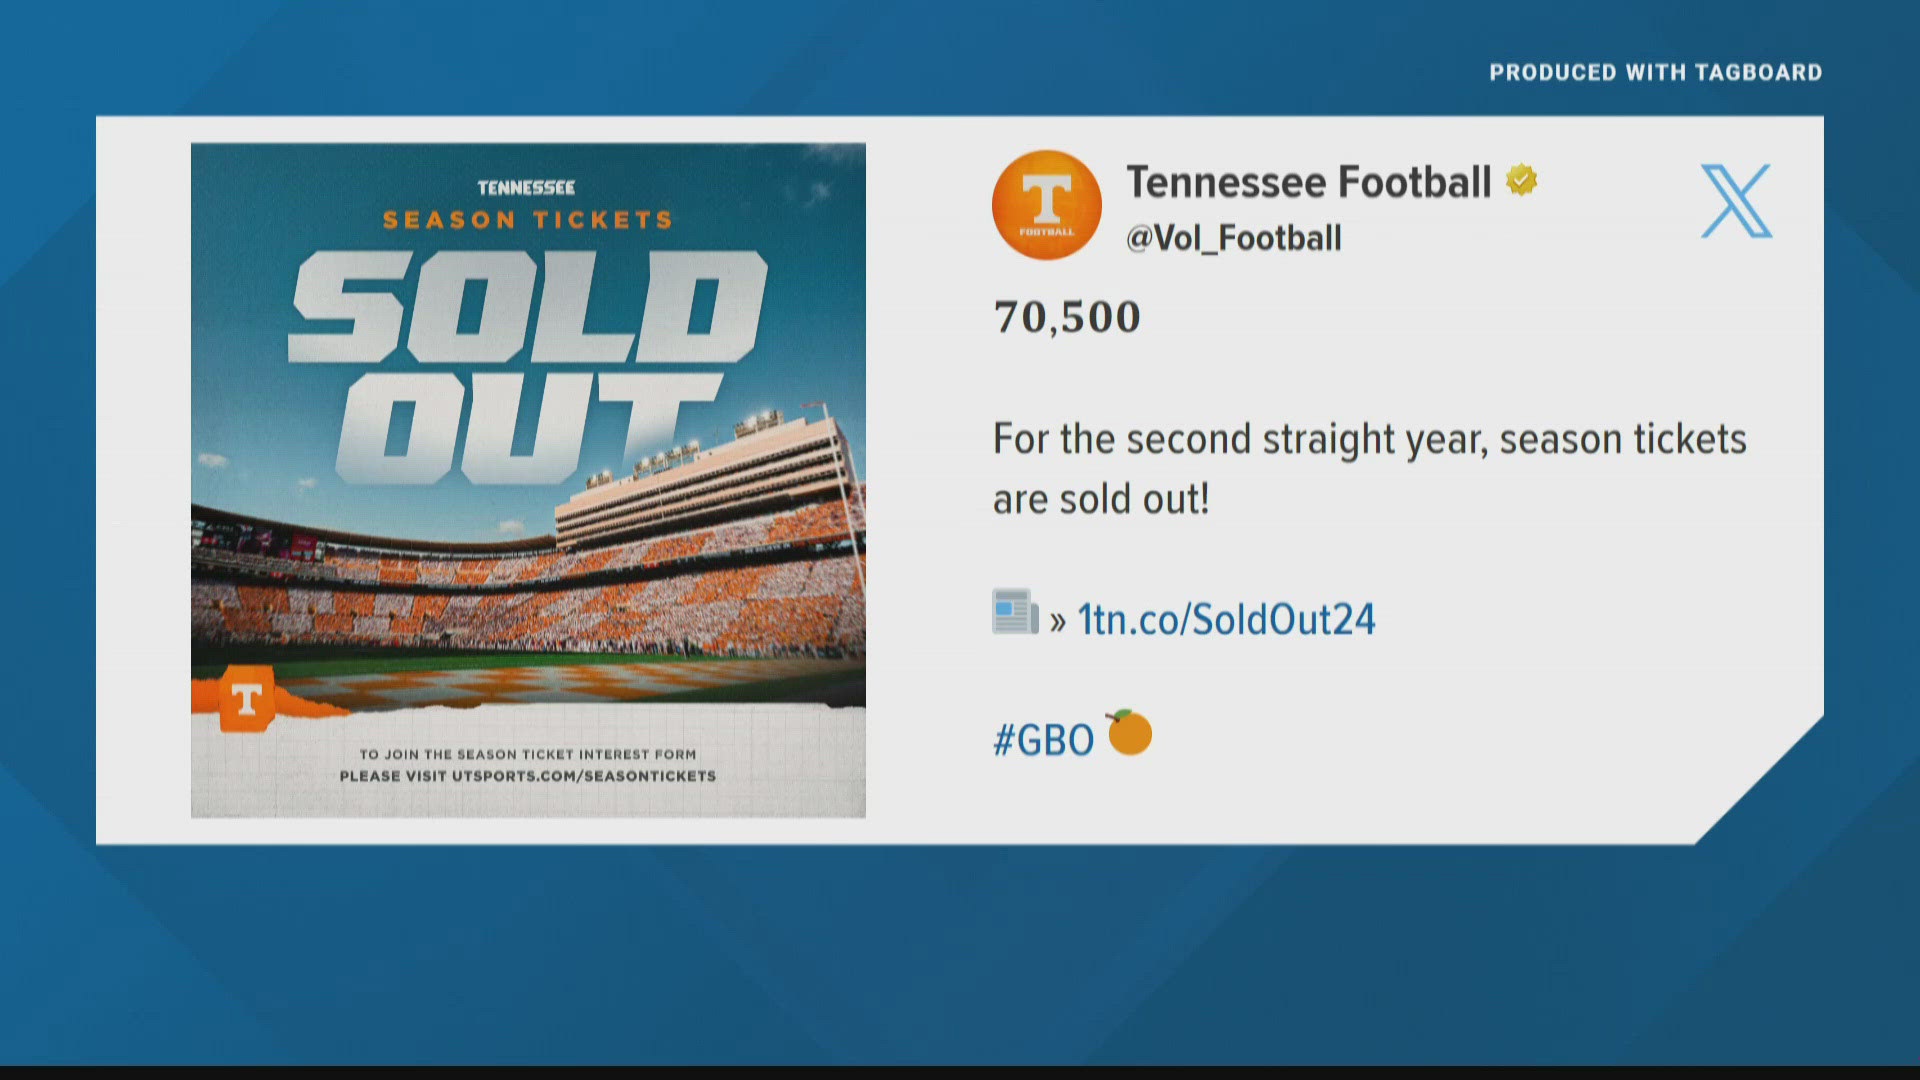 According to the university, 70,500 of its football season tickets were sold.